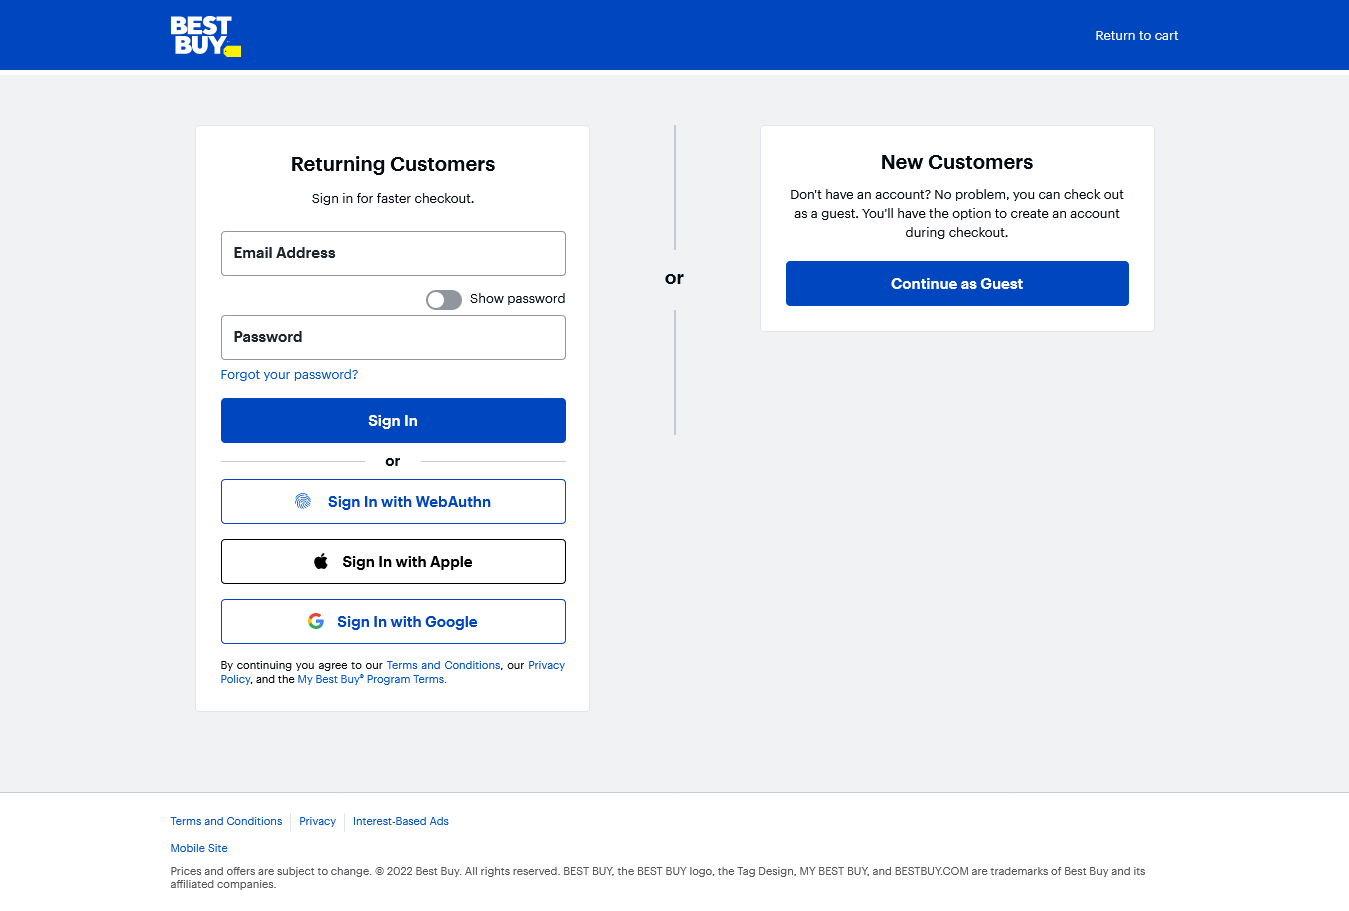 A screenshot from best buy to demonstrate the Registration option for guest posting